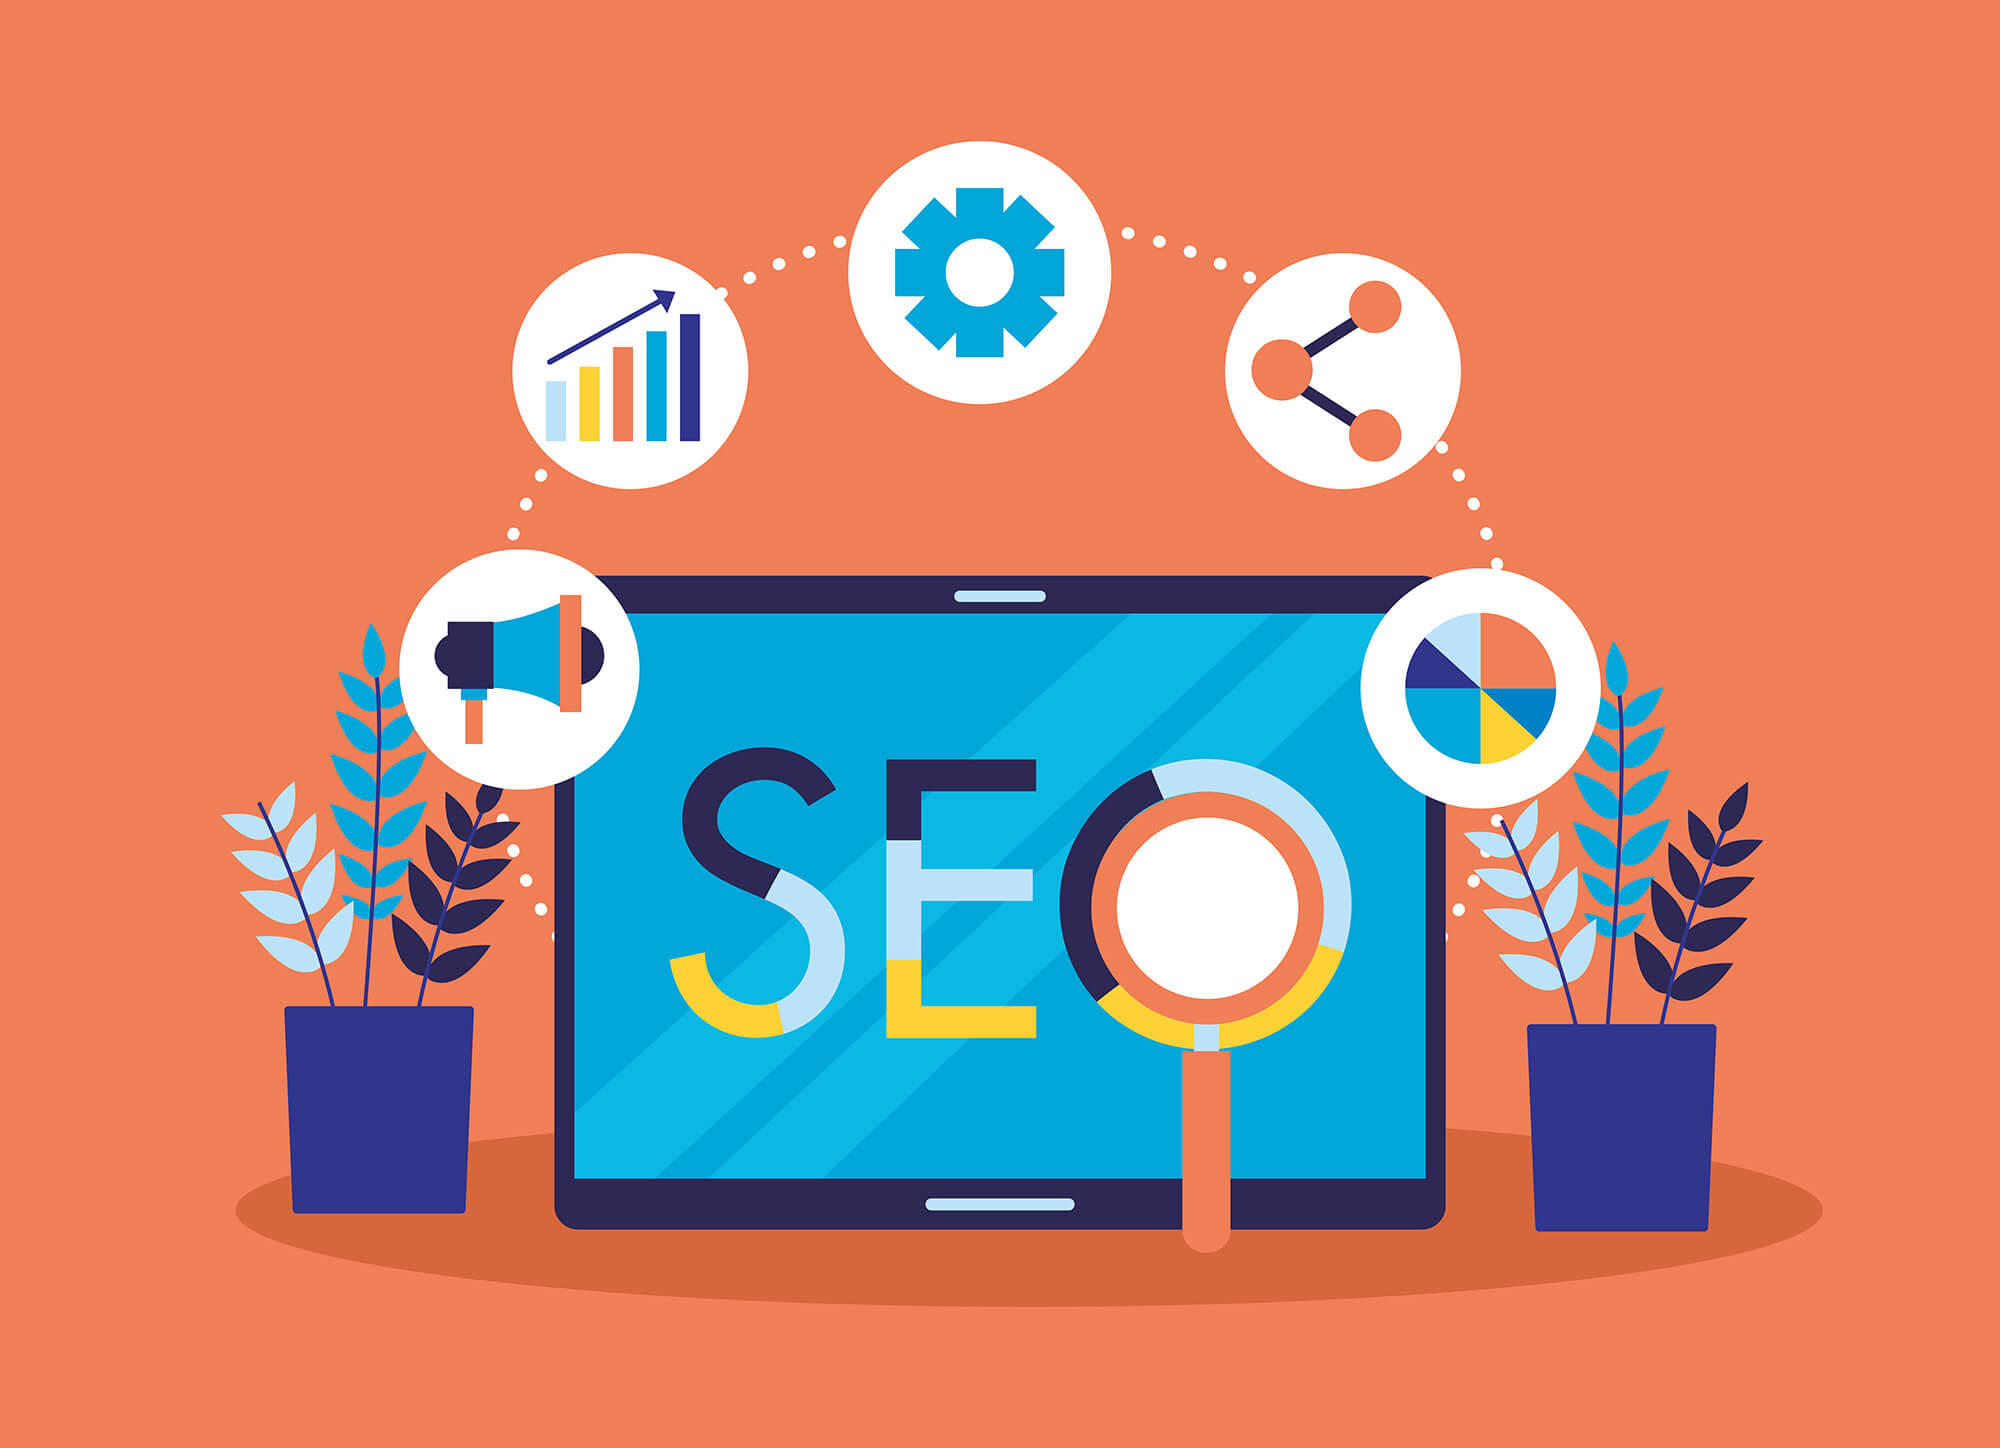 What is the deal with SEO?